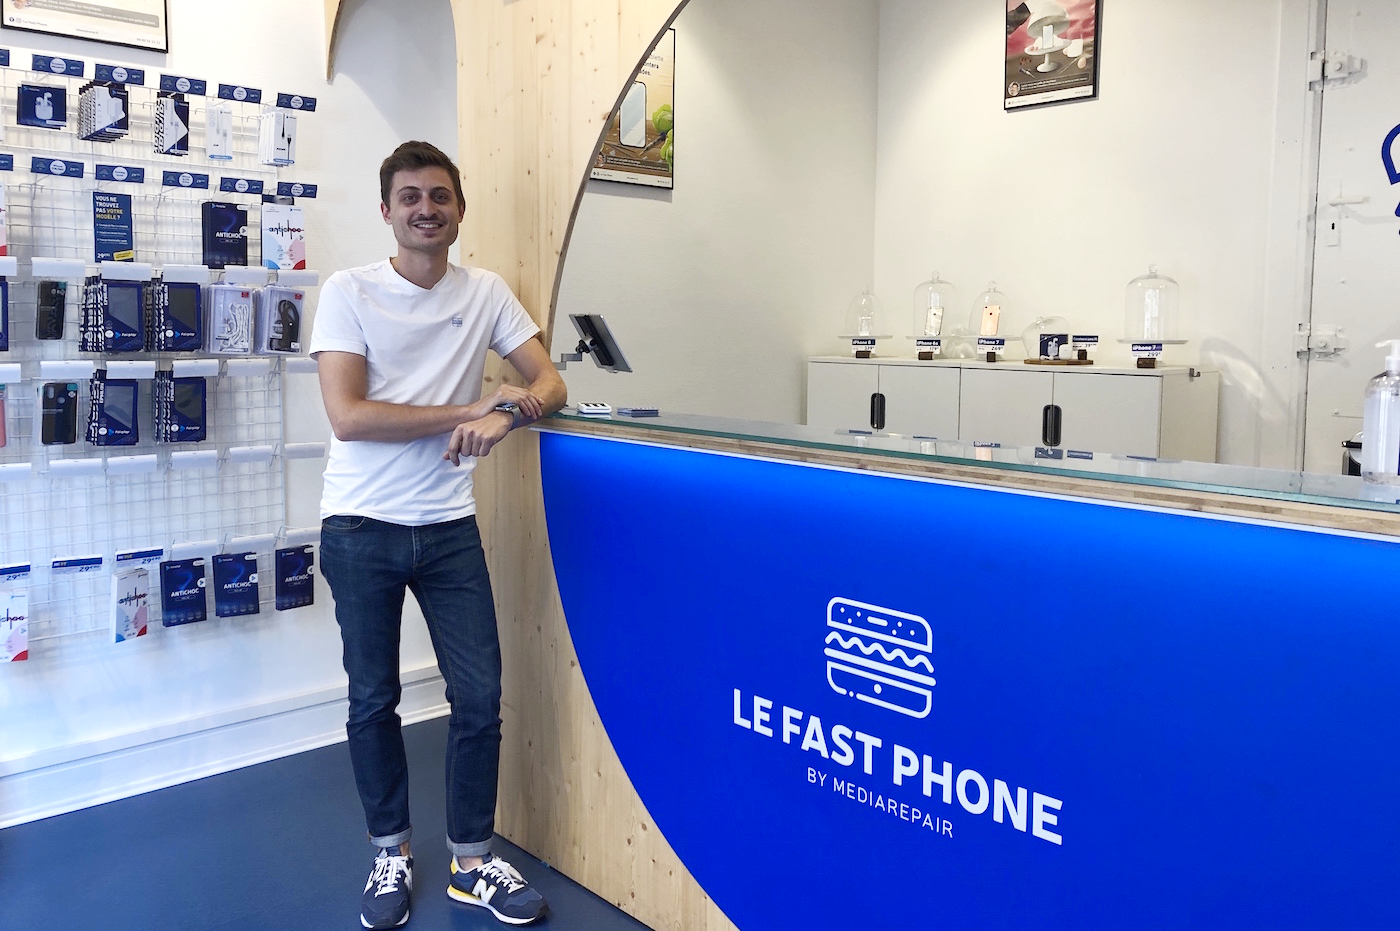 fast-phone-reparation-toutes-marques-telephones-tablettes-strasbourg